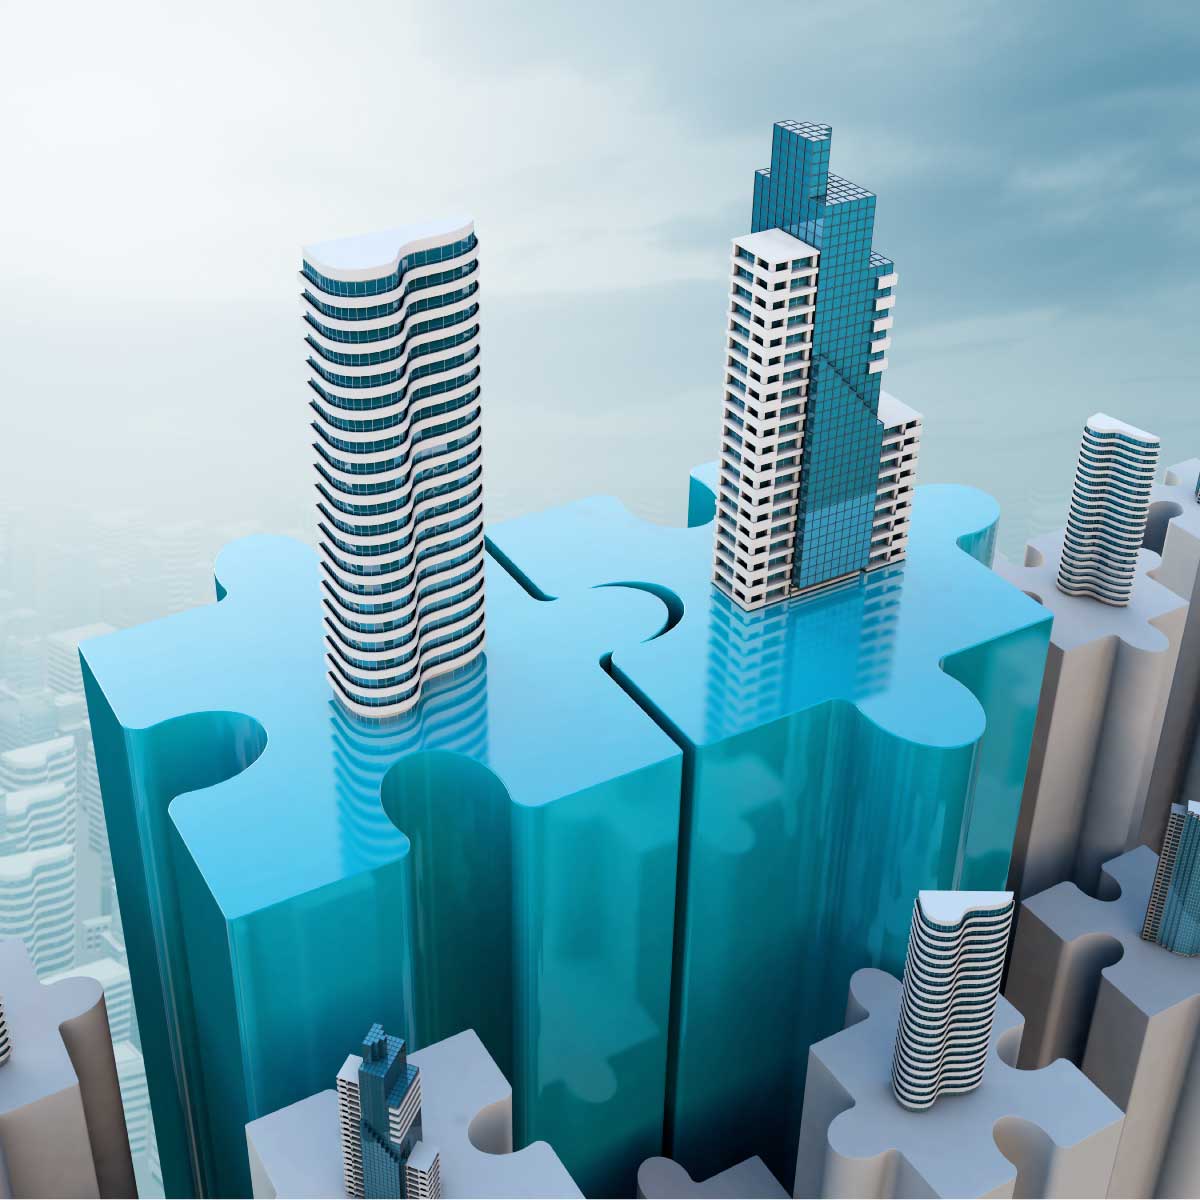 buildings connecting in a puzzle peace-merger and acquisition concept